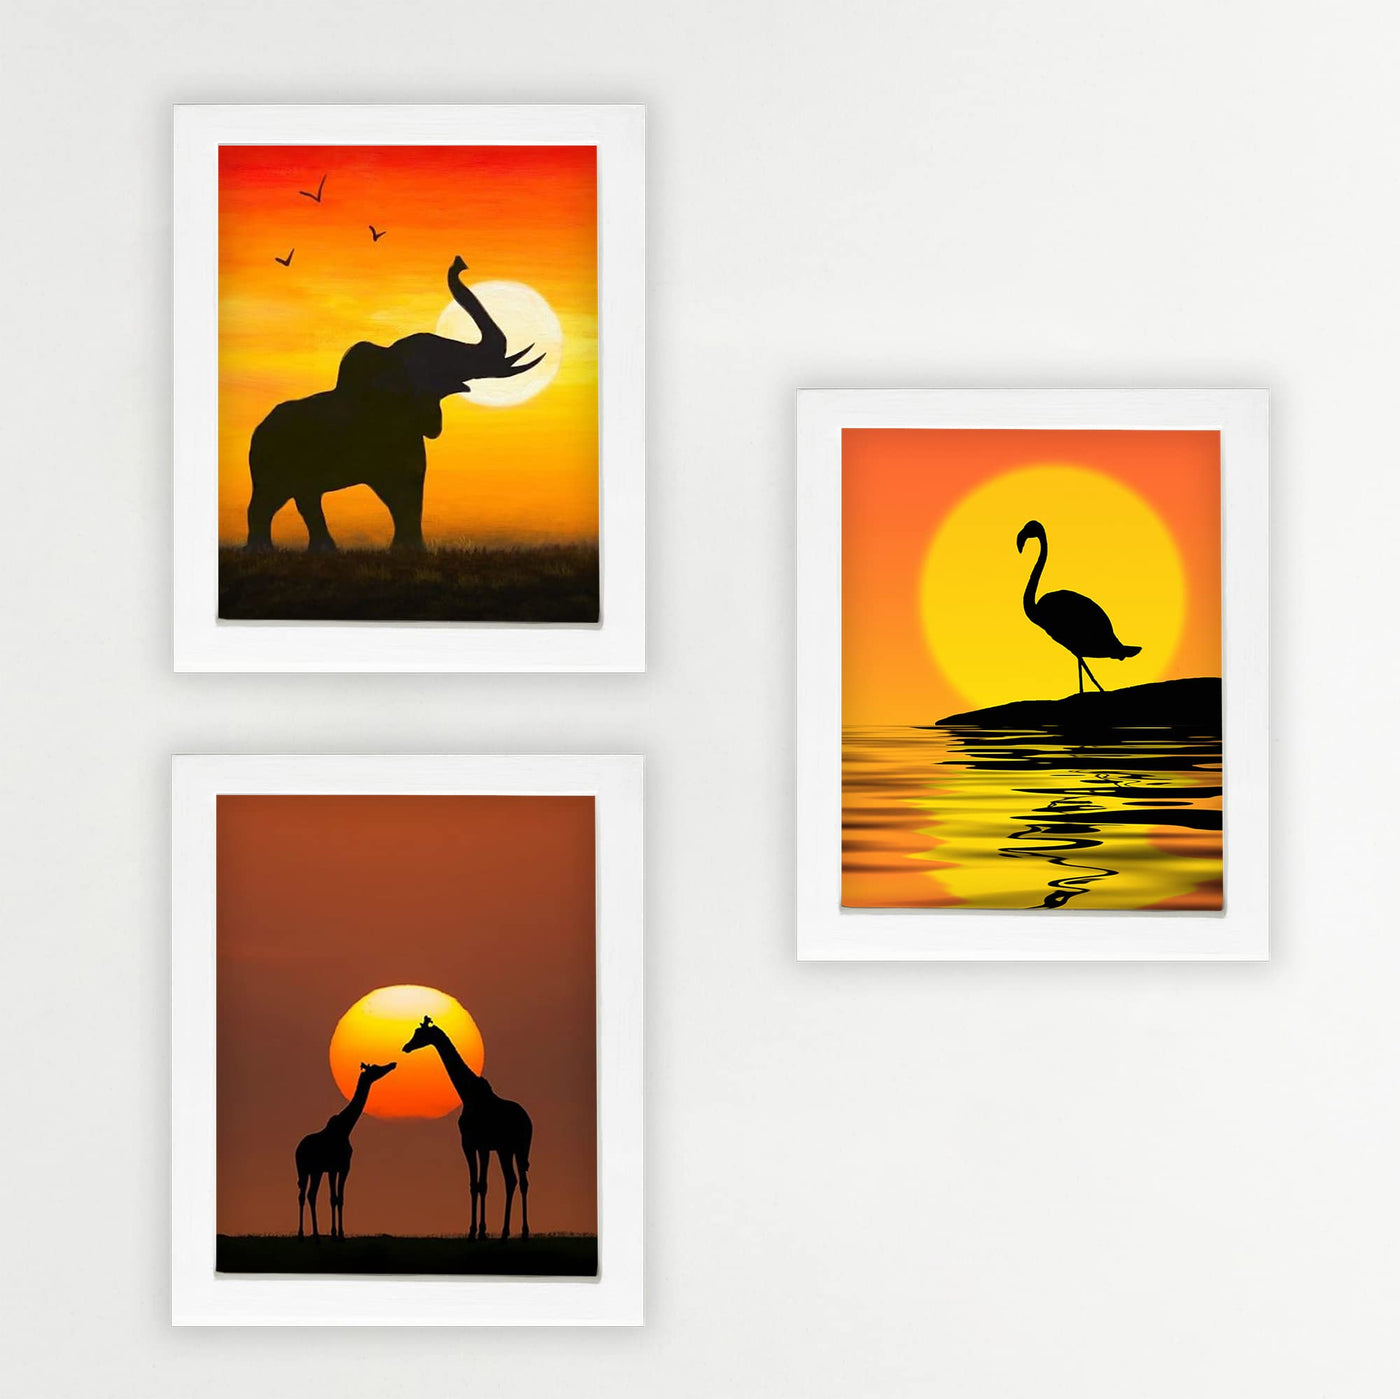 African Wildlife Safari Sunsets- 3 Image Set- 8 x 10's- Prints Wall Art- Ready to Frame. Beautiful Photo Wall Decor for Home-Office-Nursery. Elephant, Giraffes & Flamingo in Sunset Pose. Great Gift!